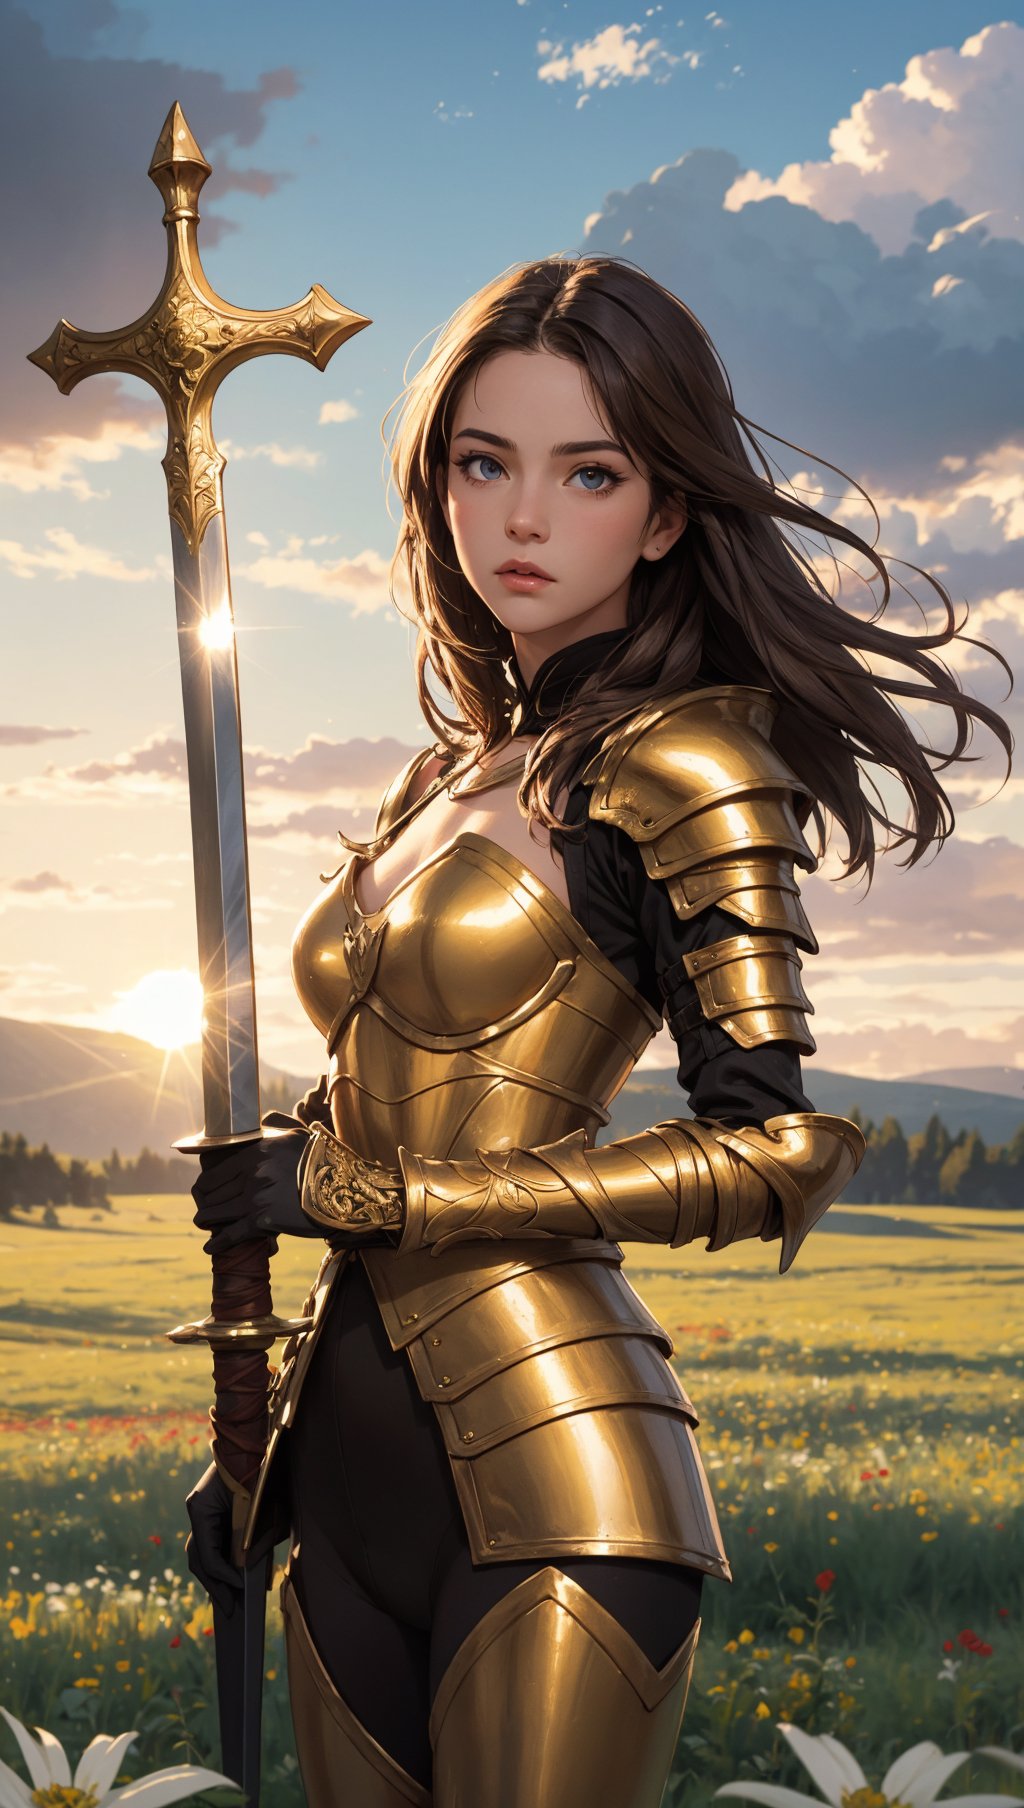 (4k),(masterpiece),(best quality),(extremely intricate),(realistic),(sharp focus),(cinematic lighting),(extremely detailed),A young girl in full plate armor,standing in a meadow of wildflowers. She is holding a sword and shield. She has long brown hair adorned with wildflowers. Her expression is determined,and her eyes are shining with courage. The sun is shining brightly behind her,casting a golden glow over the scene.,flower4rmor,flower bodysuit,Flower,